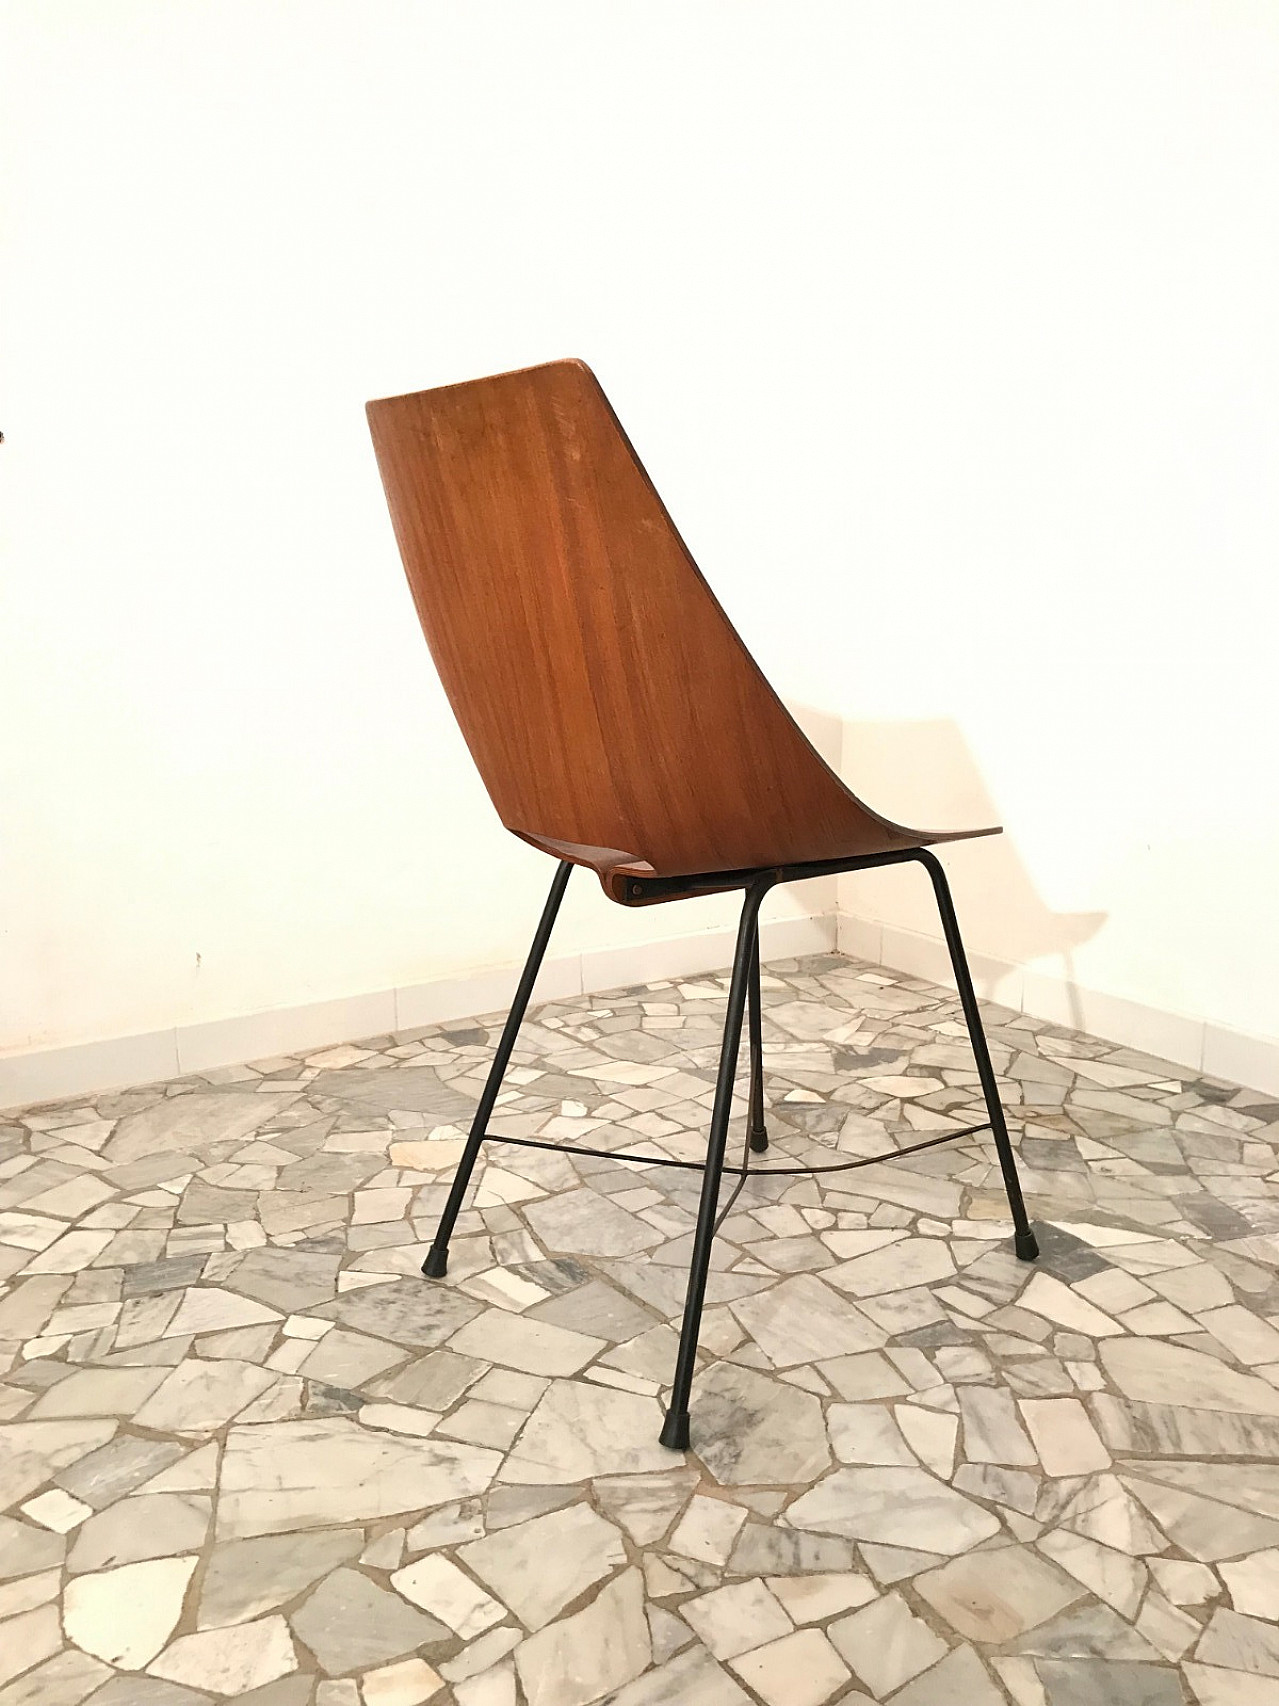 6 chairs plywood curved companies Monza 3